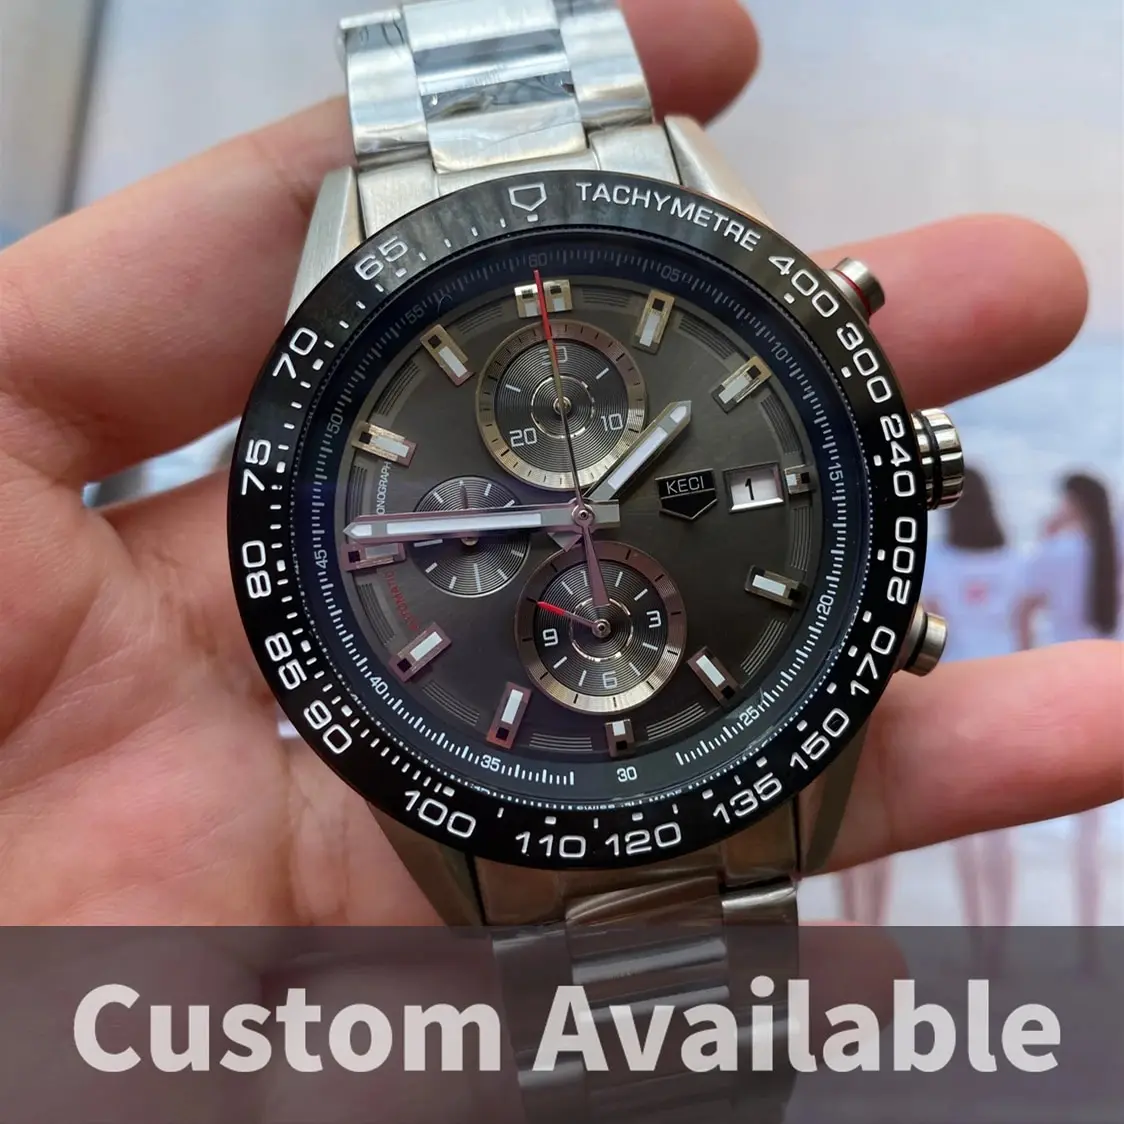 

Men's Luxury Quartz Sports Watch- Chronograph, Luminous Hands, Battery-Powered by VK Movement - Wristwatch for Birthday Gifts